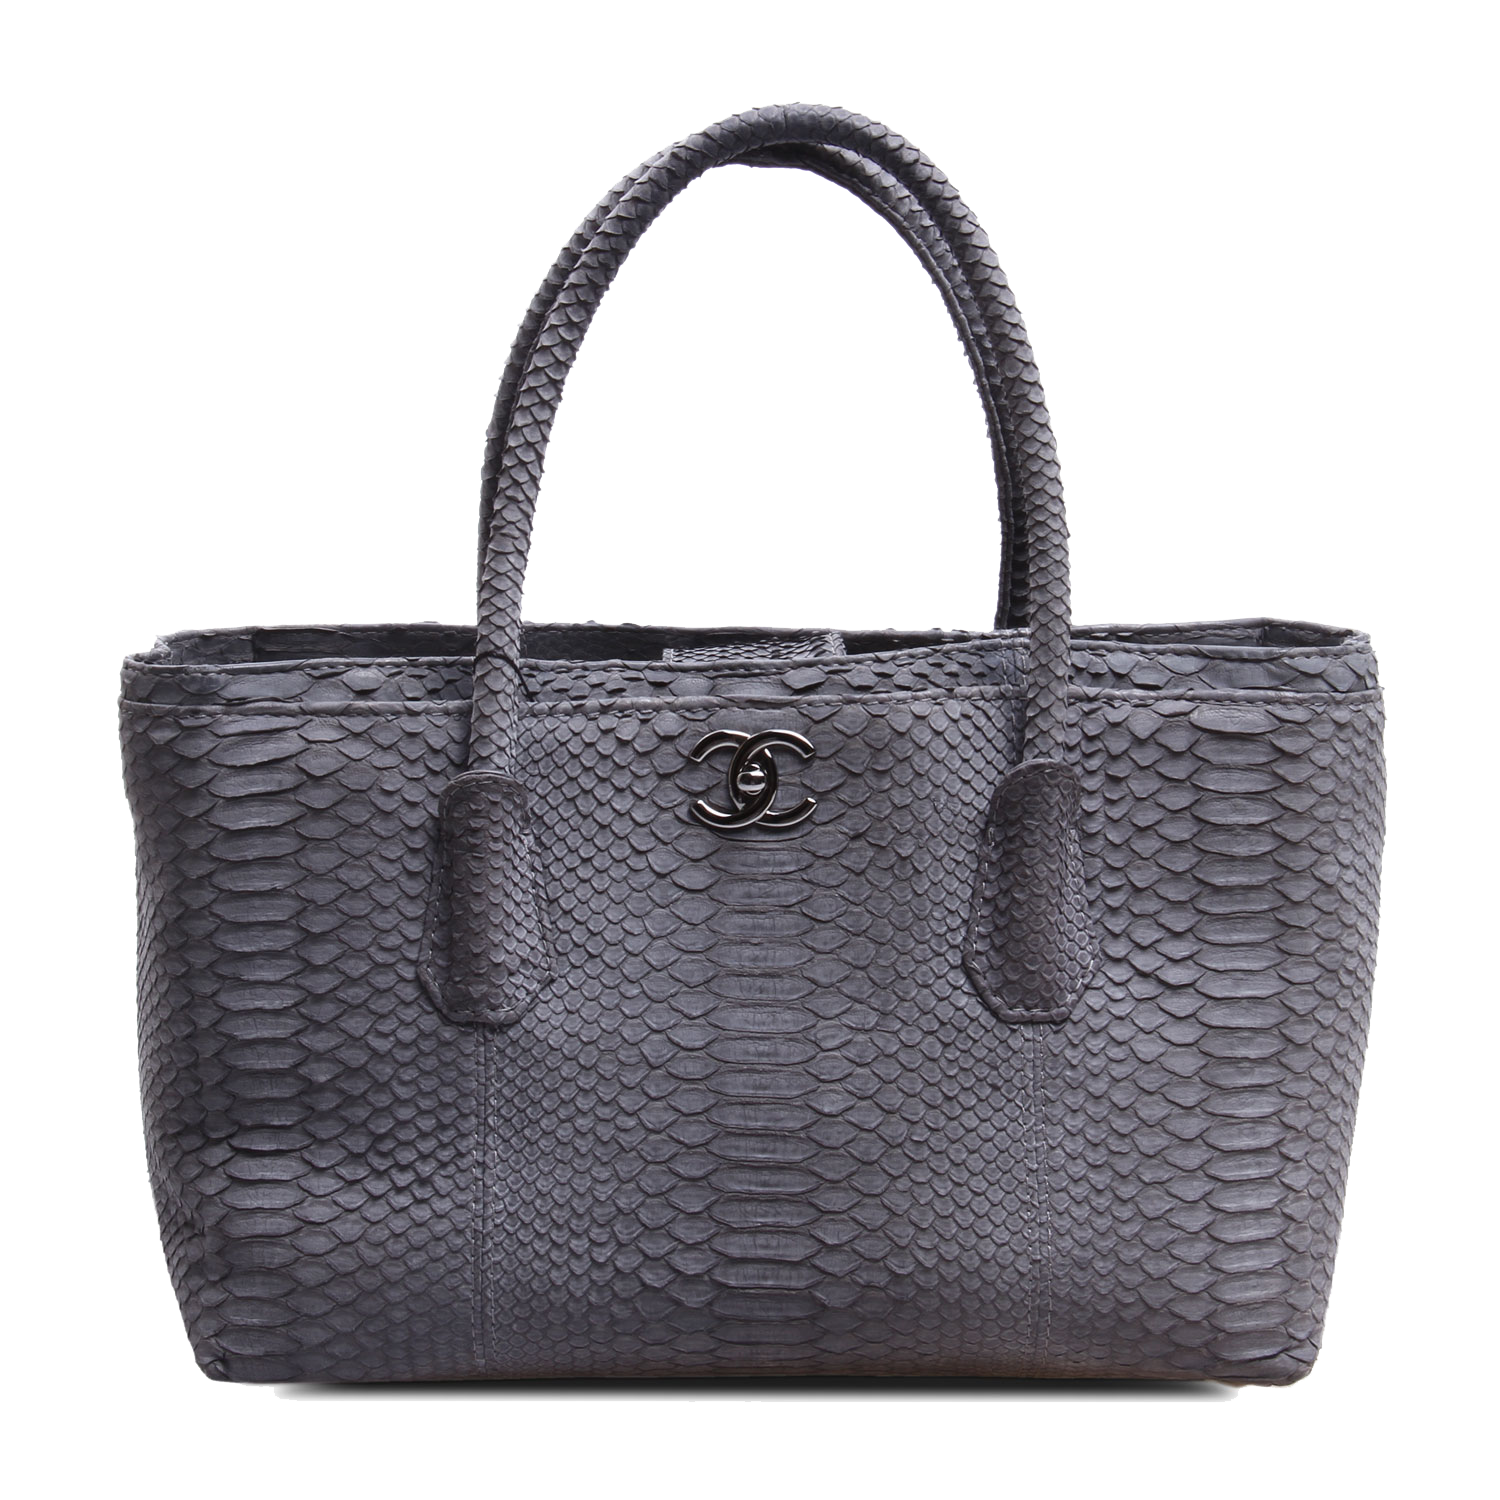 Vuitton Tote Leather Louis Snakeskin Bag Pattern Clipart